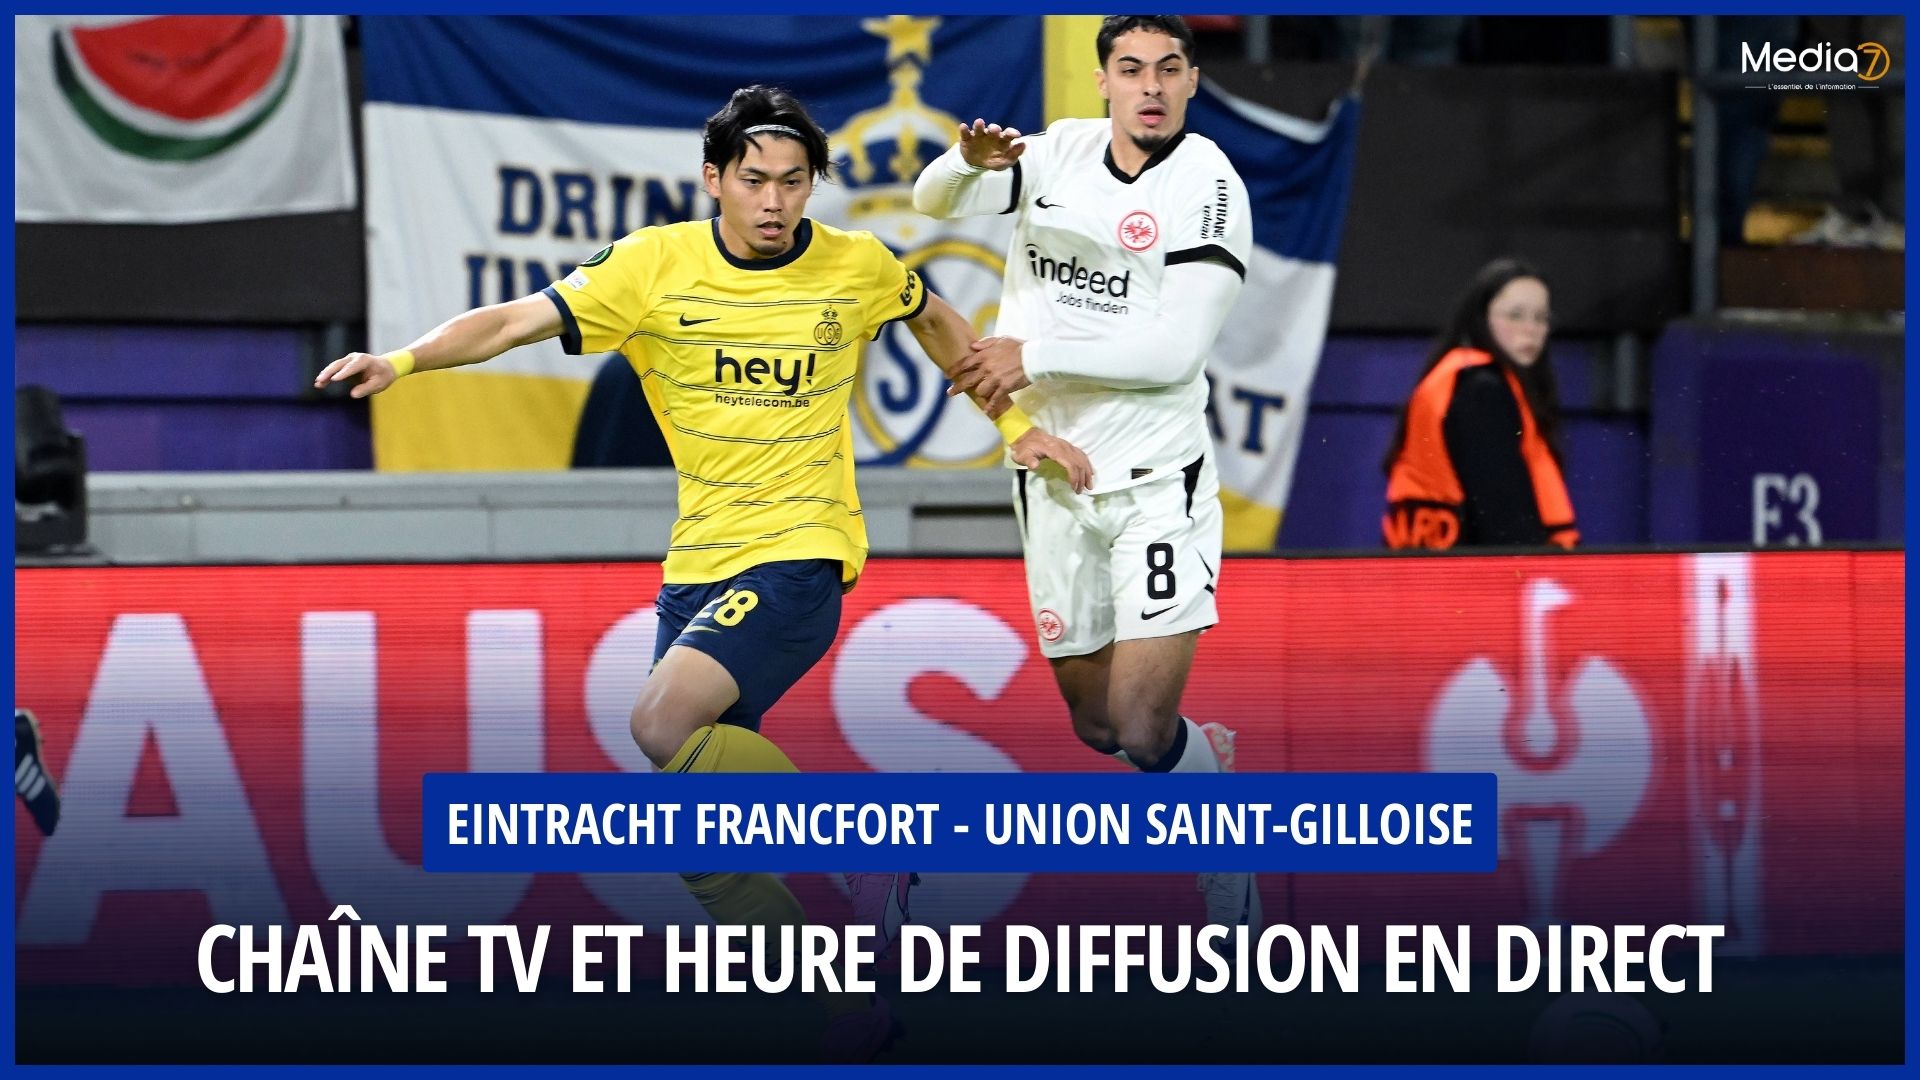 Eintracht Frankfurt – Union Saint-Gilloise match live: On which TV & streaming channel? At what time ? - Media7